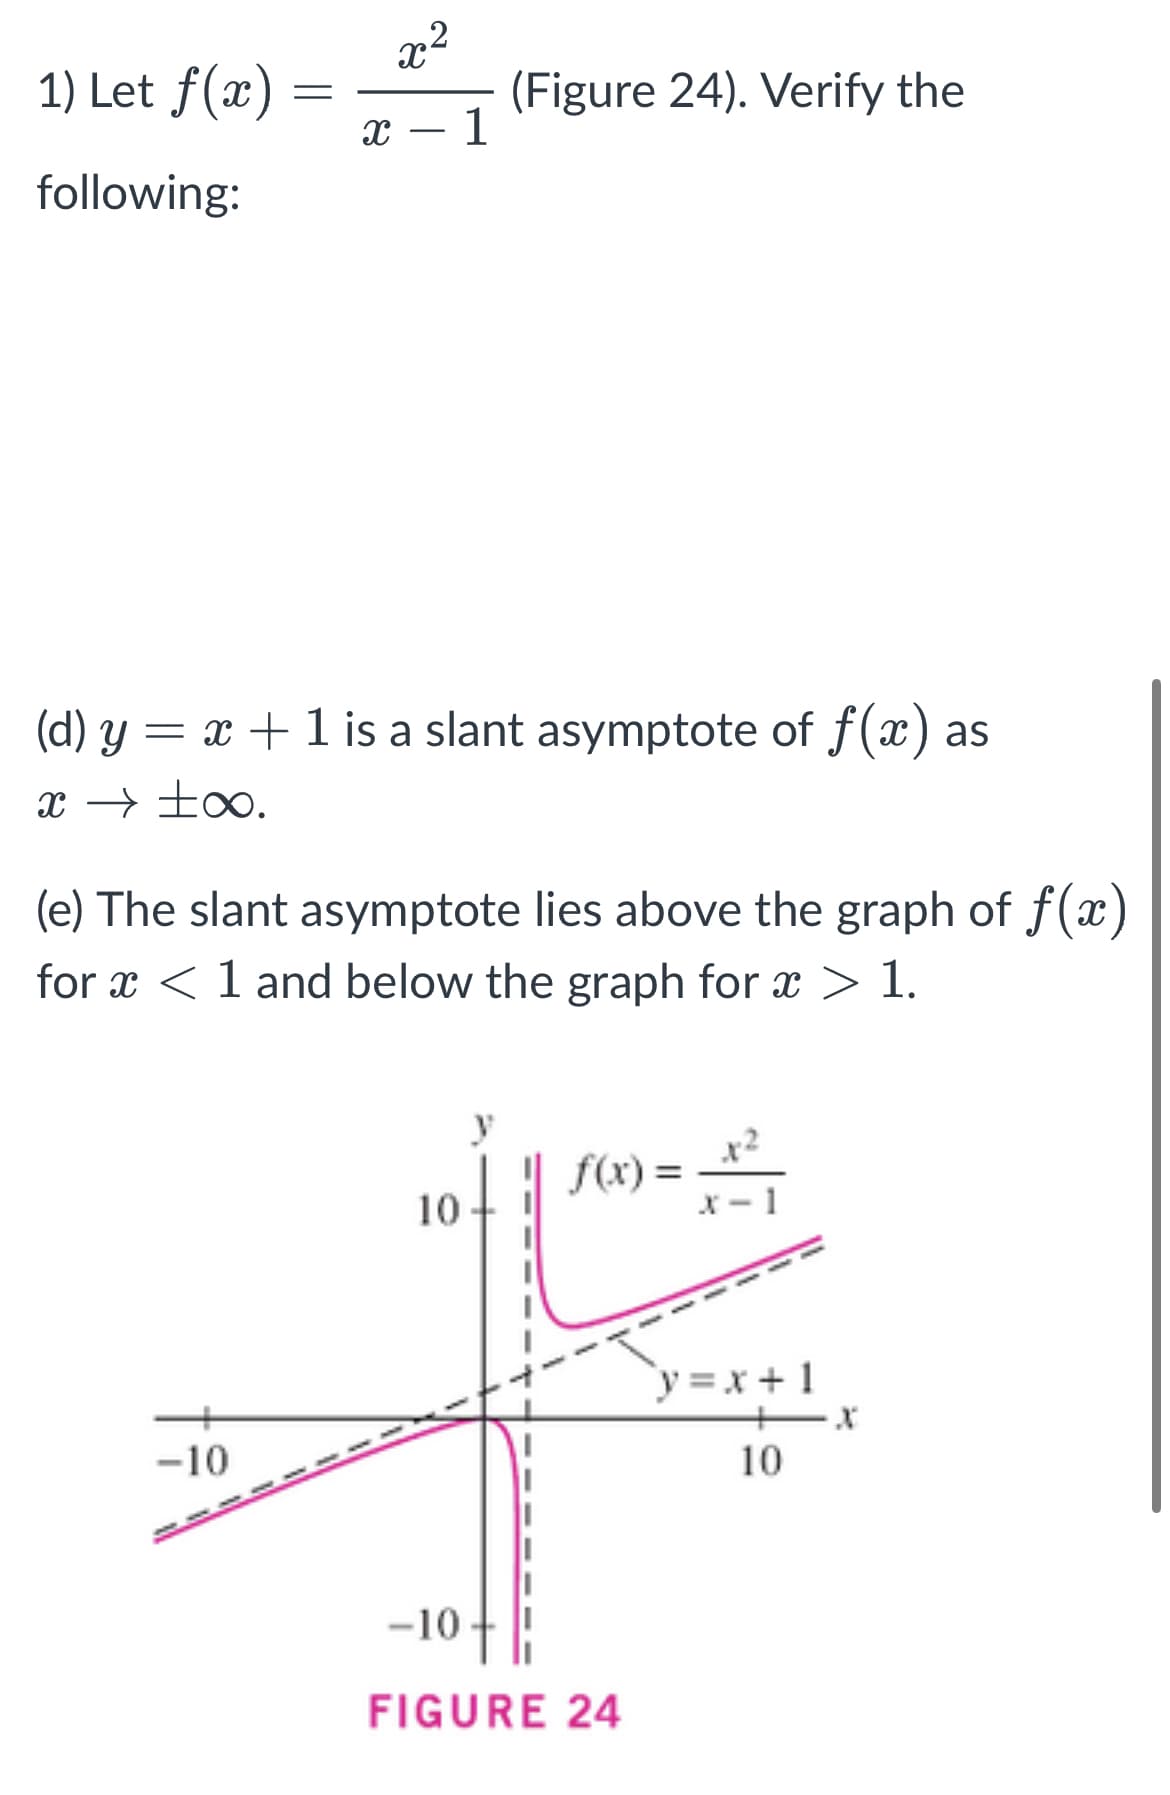 x²
1) Let f(x)
(Figure 24). Verify the
X 1
following:
(d) y = x + 1 is a slant asymptote of f(x) as
x → ±∞.
(e) The slant asymptote lies above the graph of f(x)
for x < 1 and below the graph for x > 1.
f(x) =
10
-10
=
-10.
FIGURE 24
y=x+1
10